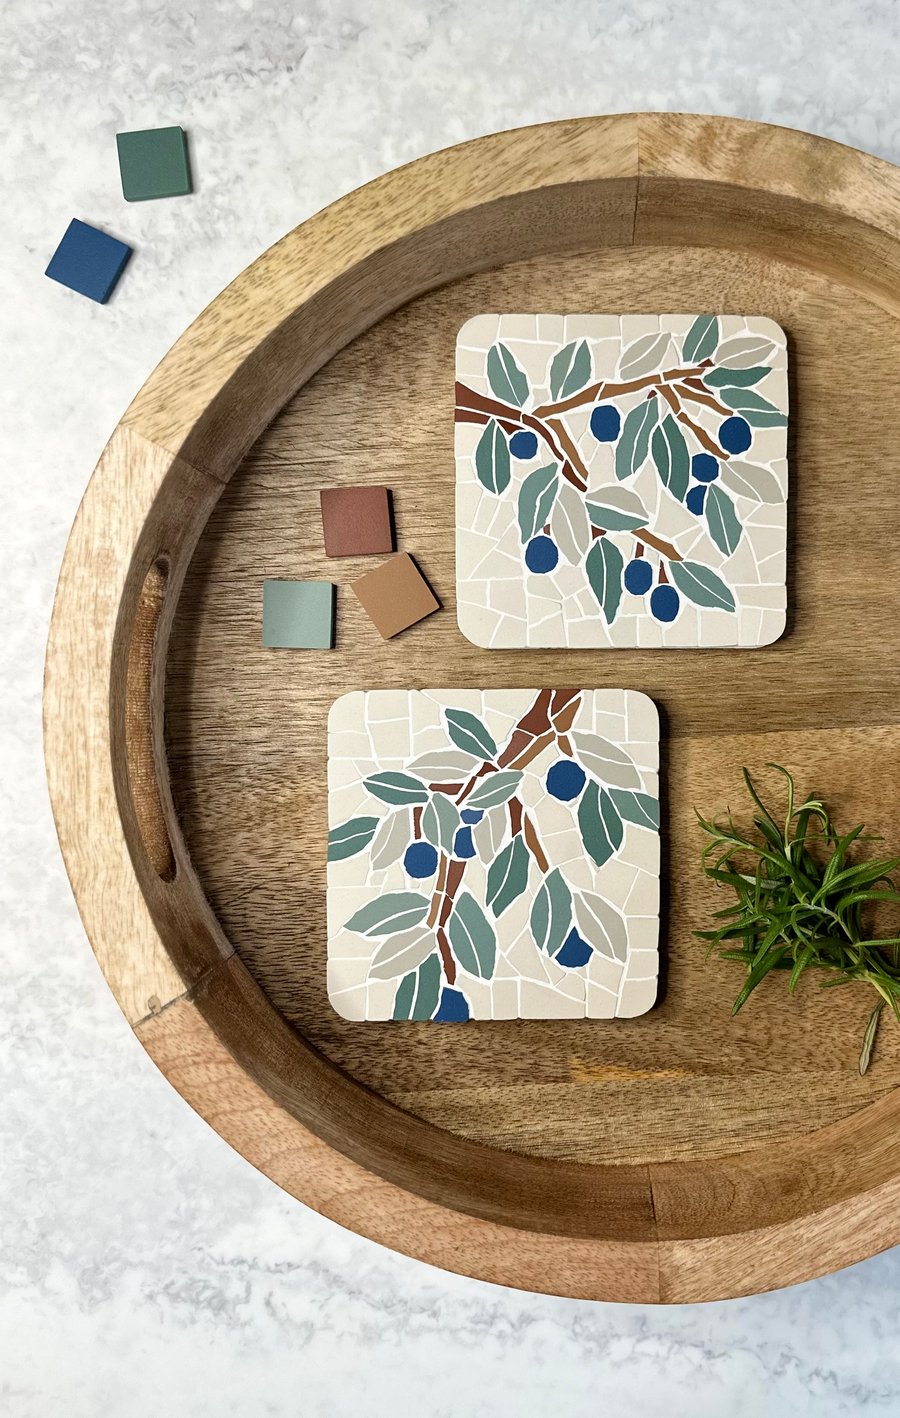 Two Mosaic Coasters in Olive Branch design  